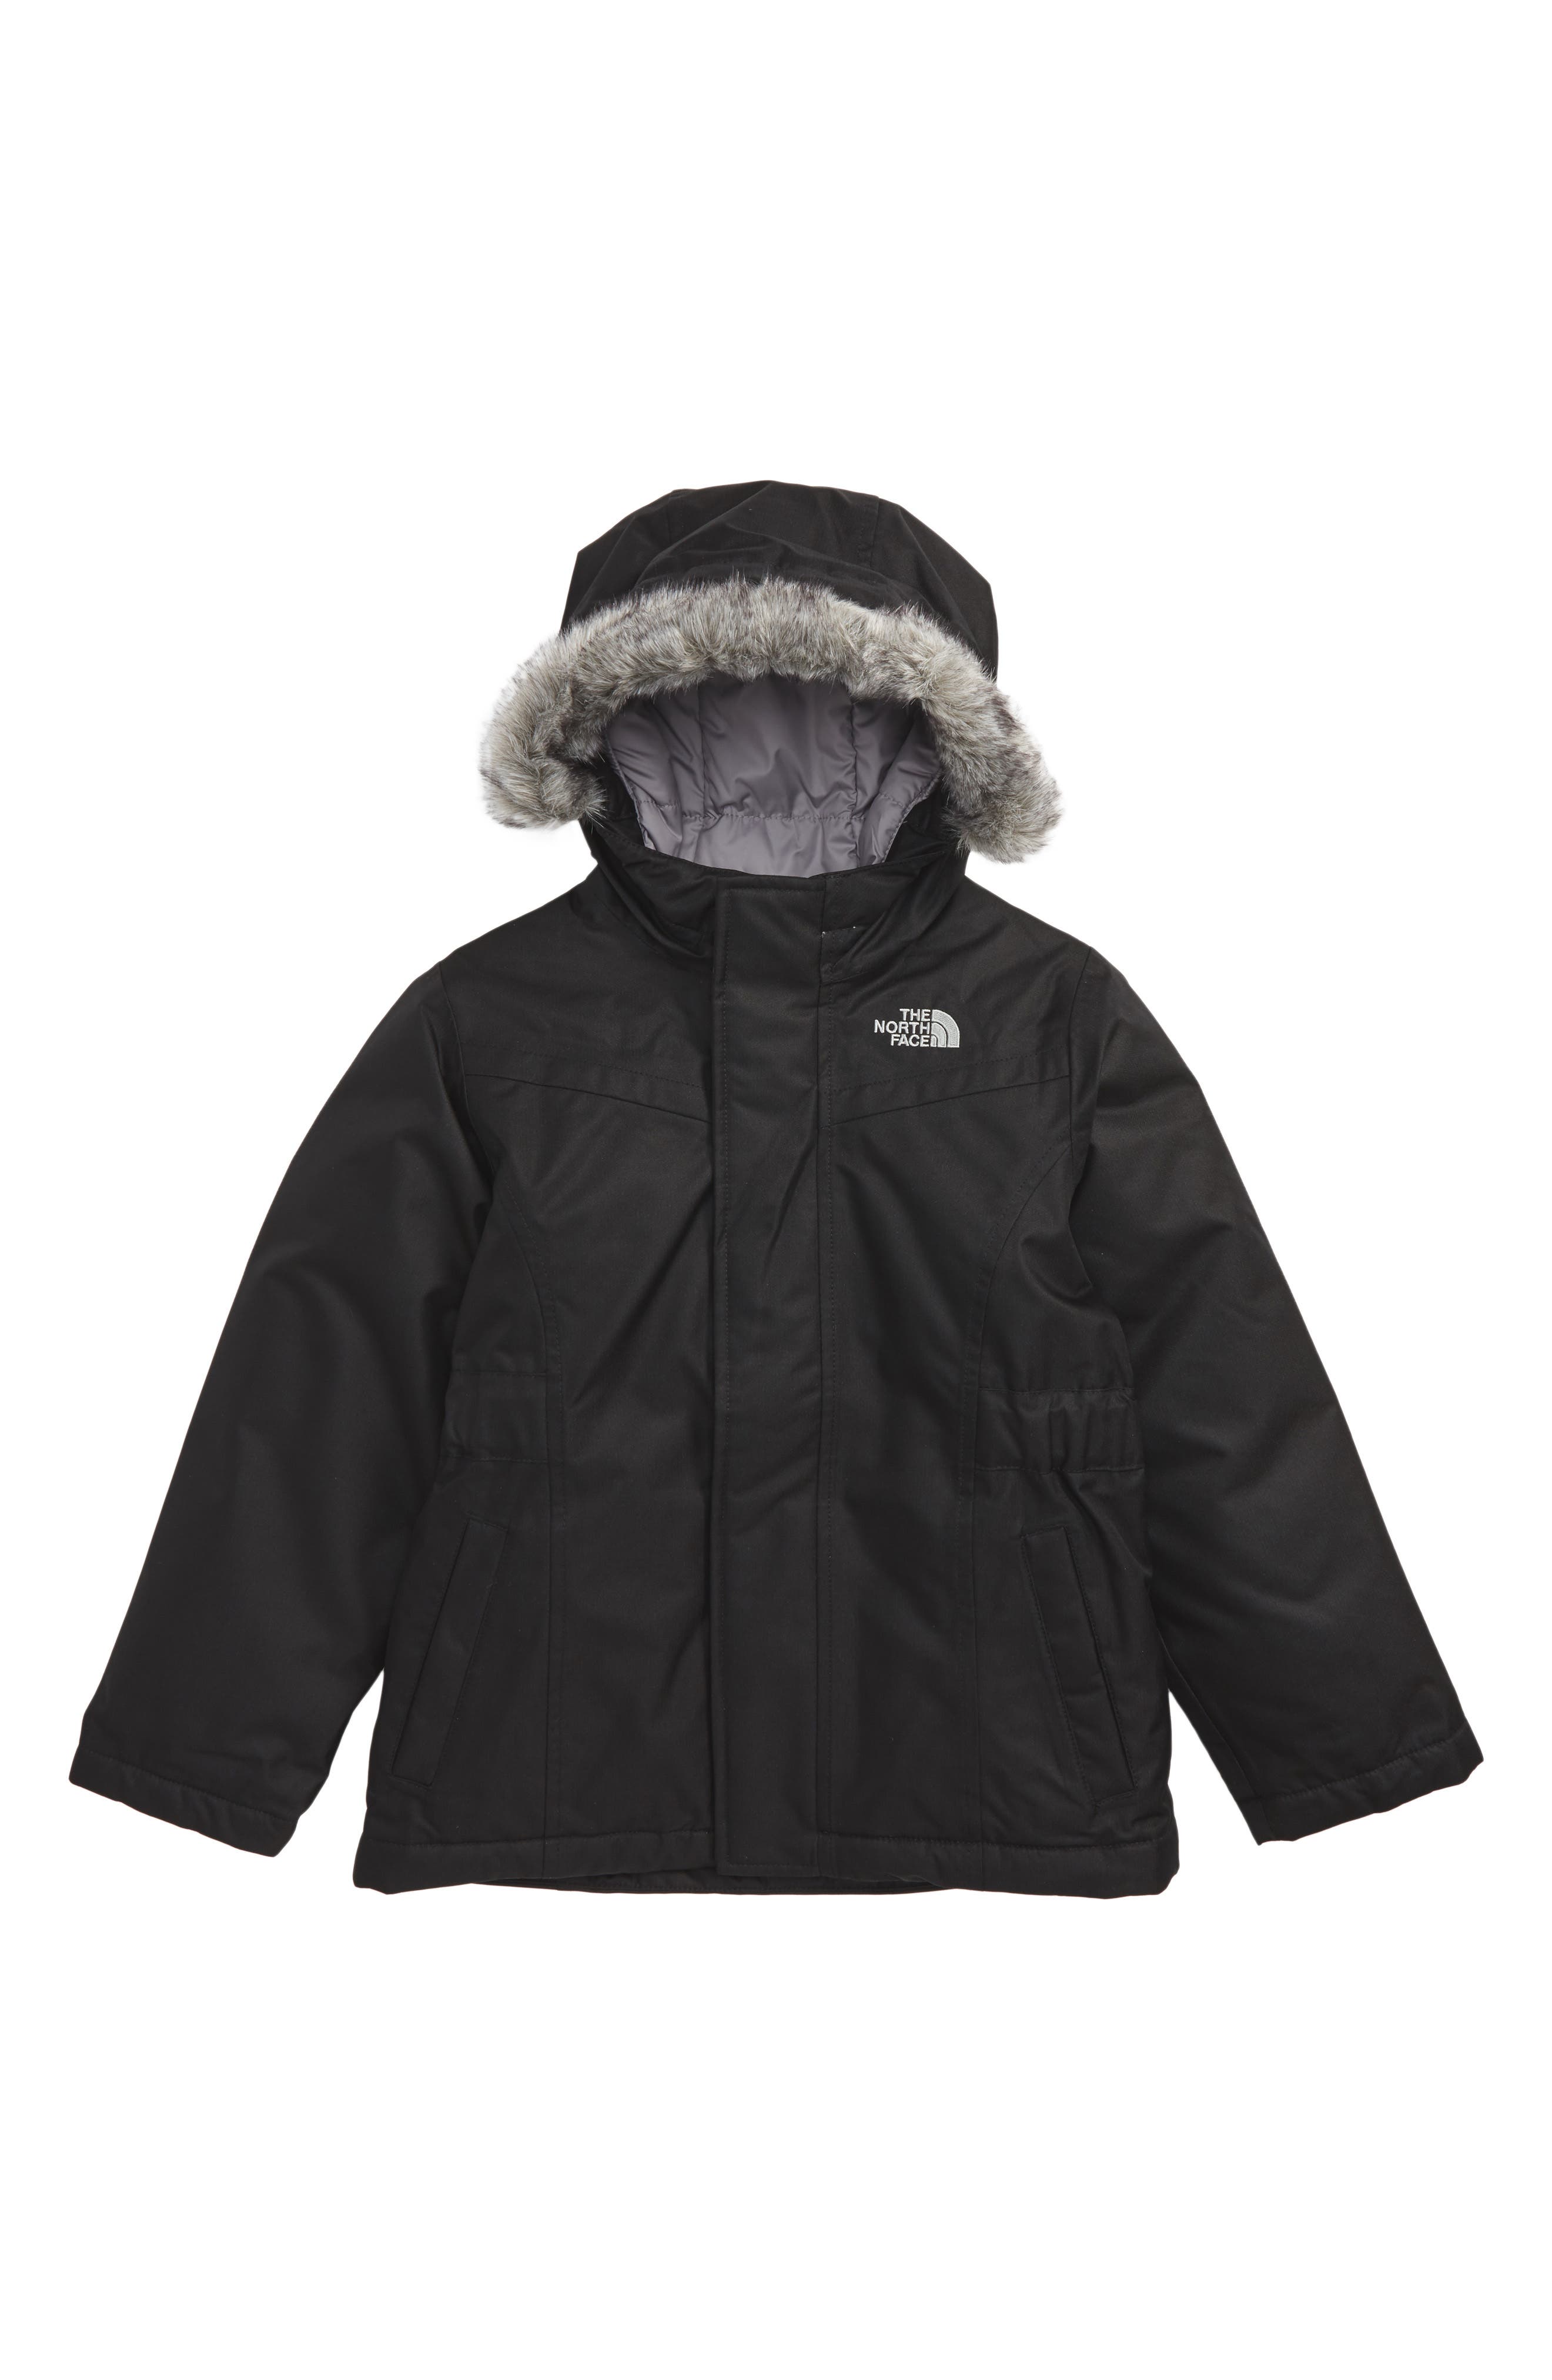 north face 550